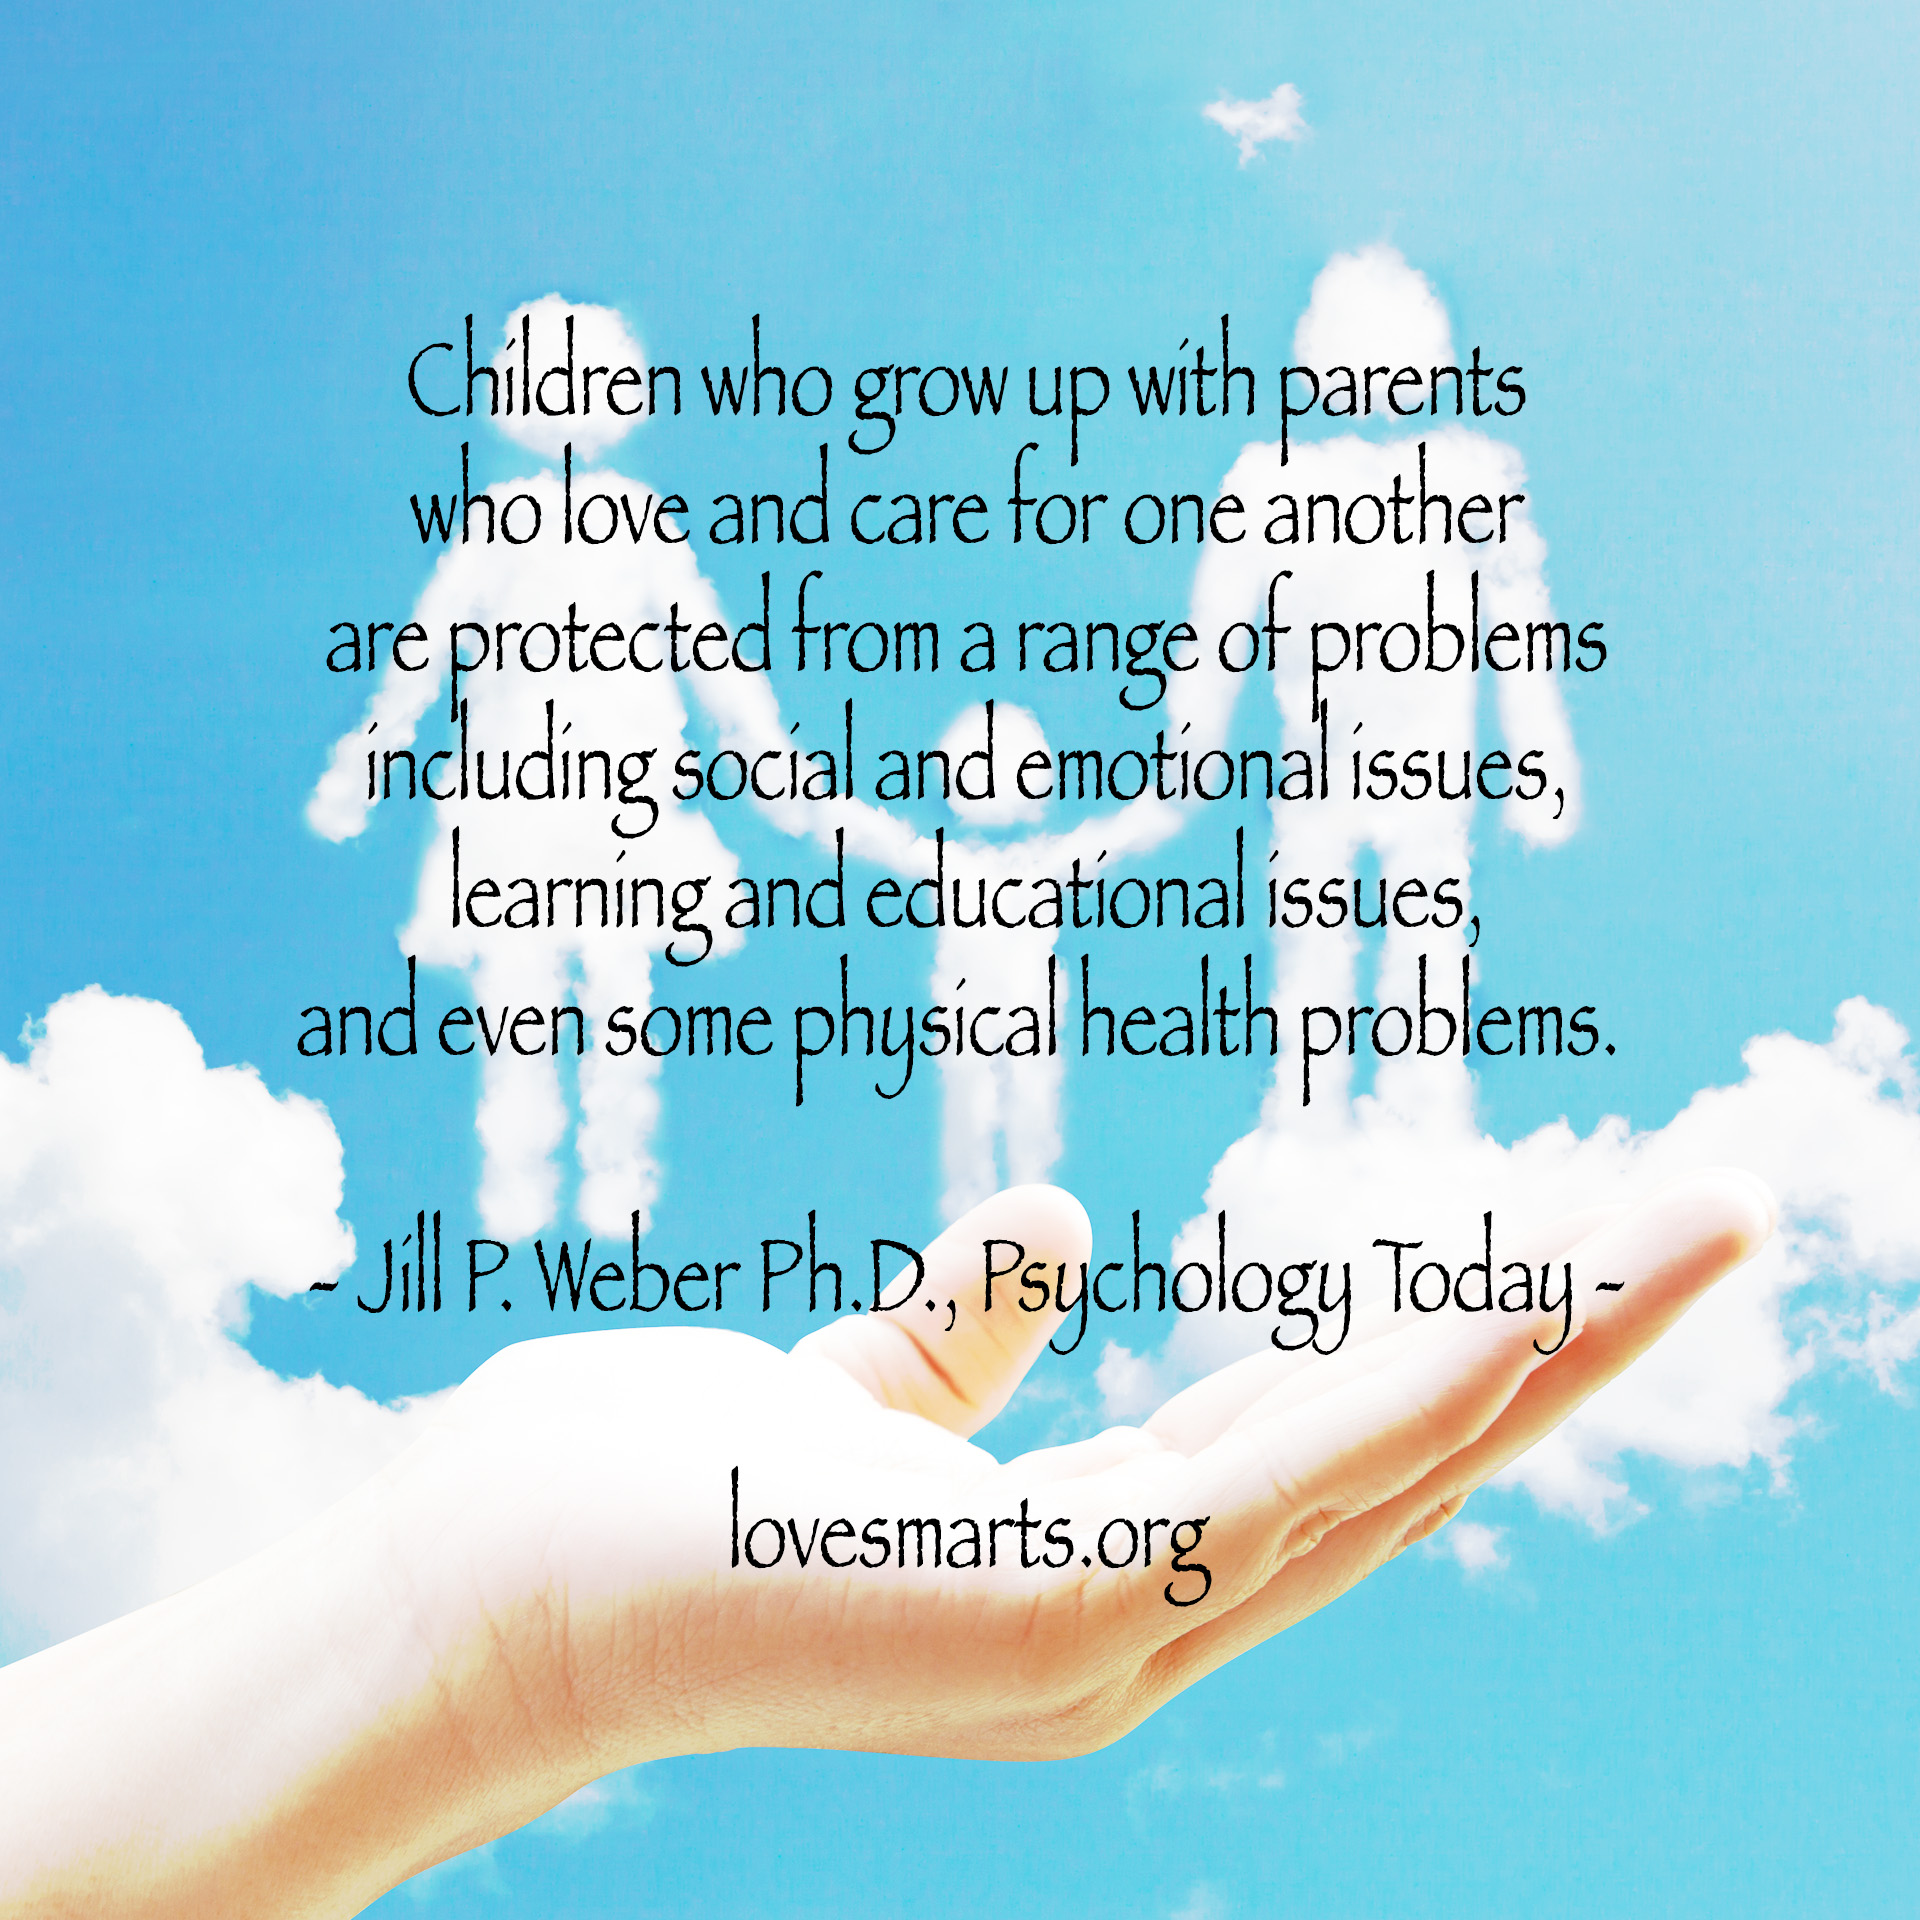 Children who grow up with parents who love and care for one another are protected from a range of problems including social and emotional issues, learning and educational issues, and even some physical health problems. - Jill P. Weber Ph.D., Psychology Today -